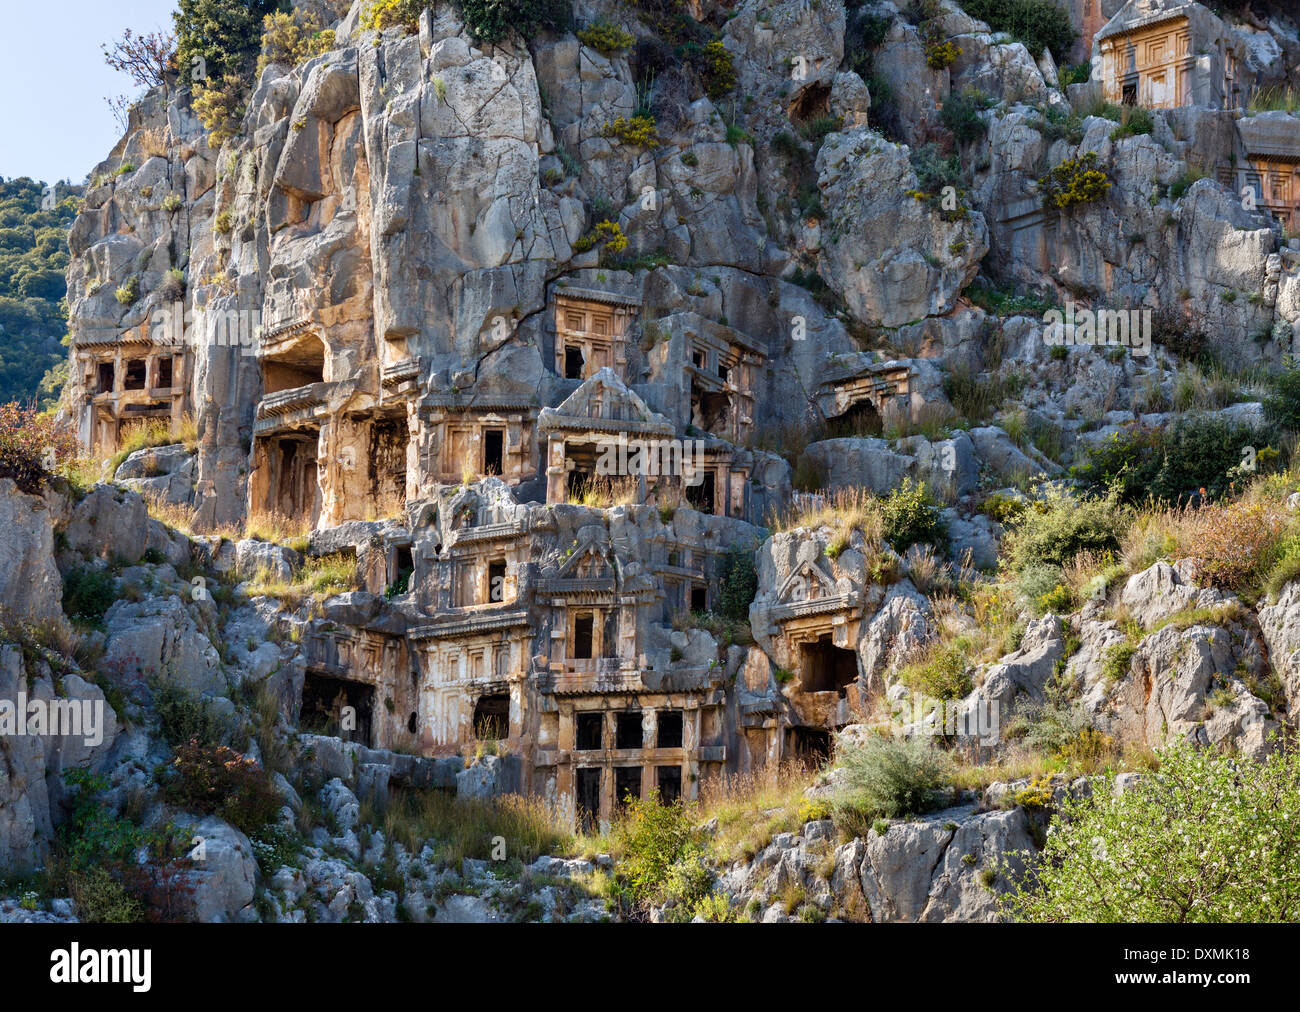 Rock tombs in the cliff face at the ancient ruins of Myra, Demre, Antalya Province, Lycia, Turkey Stock Photo